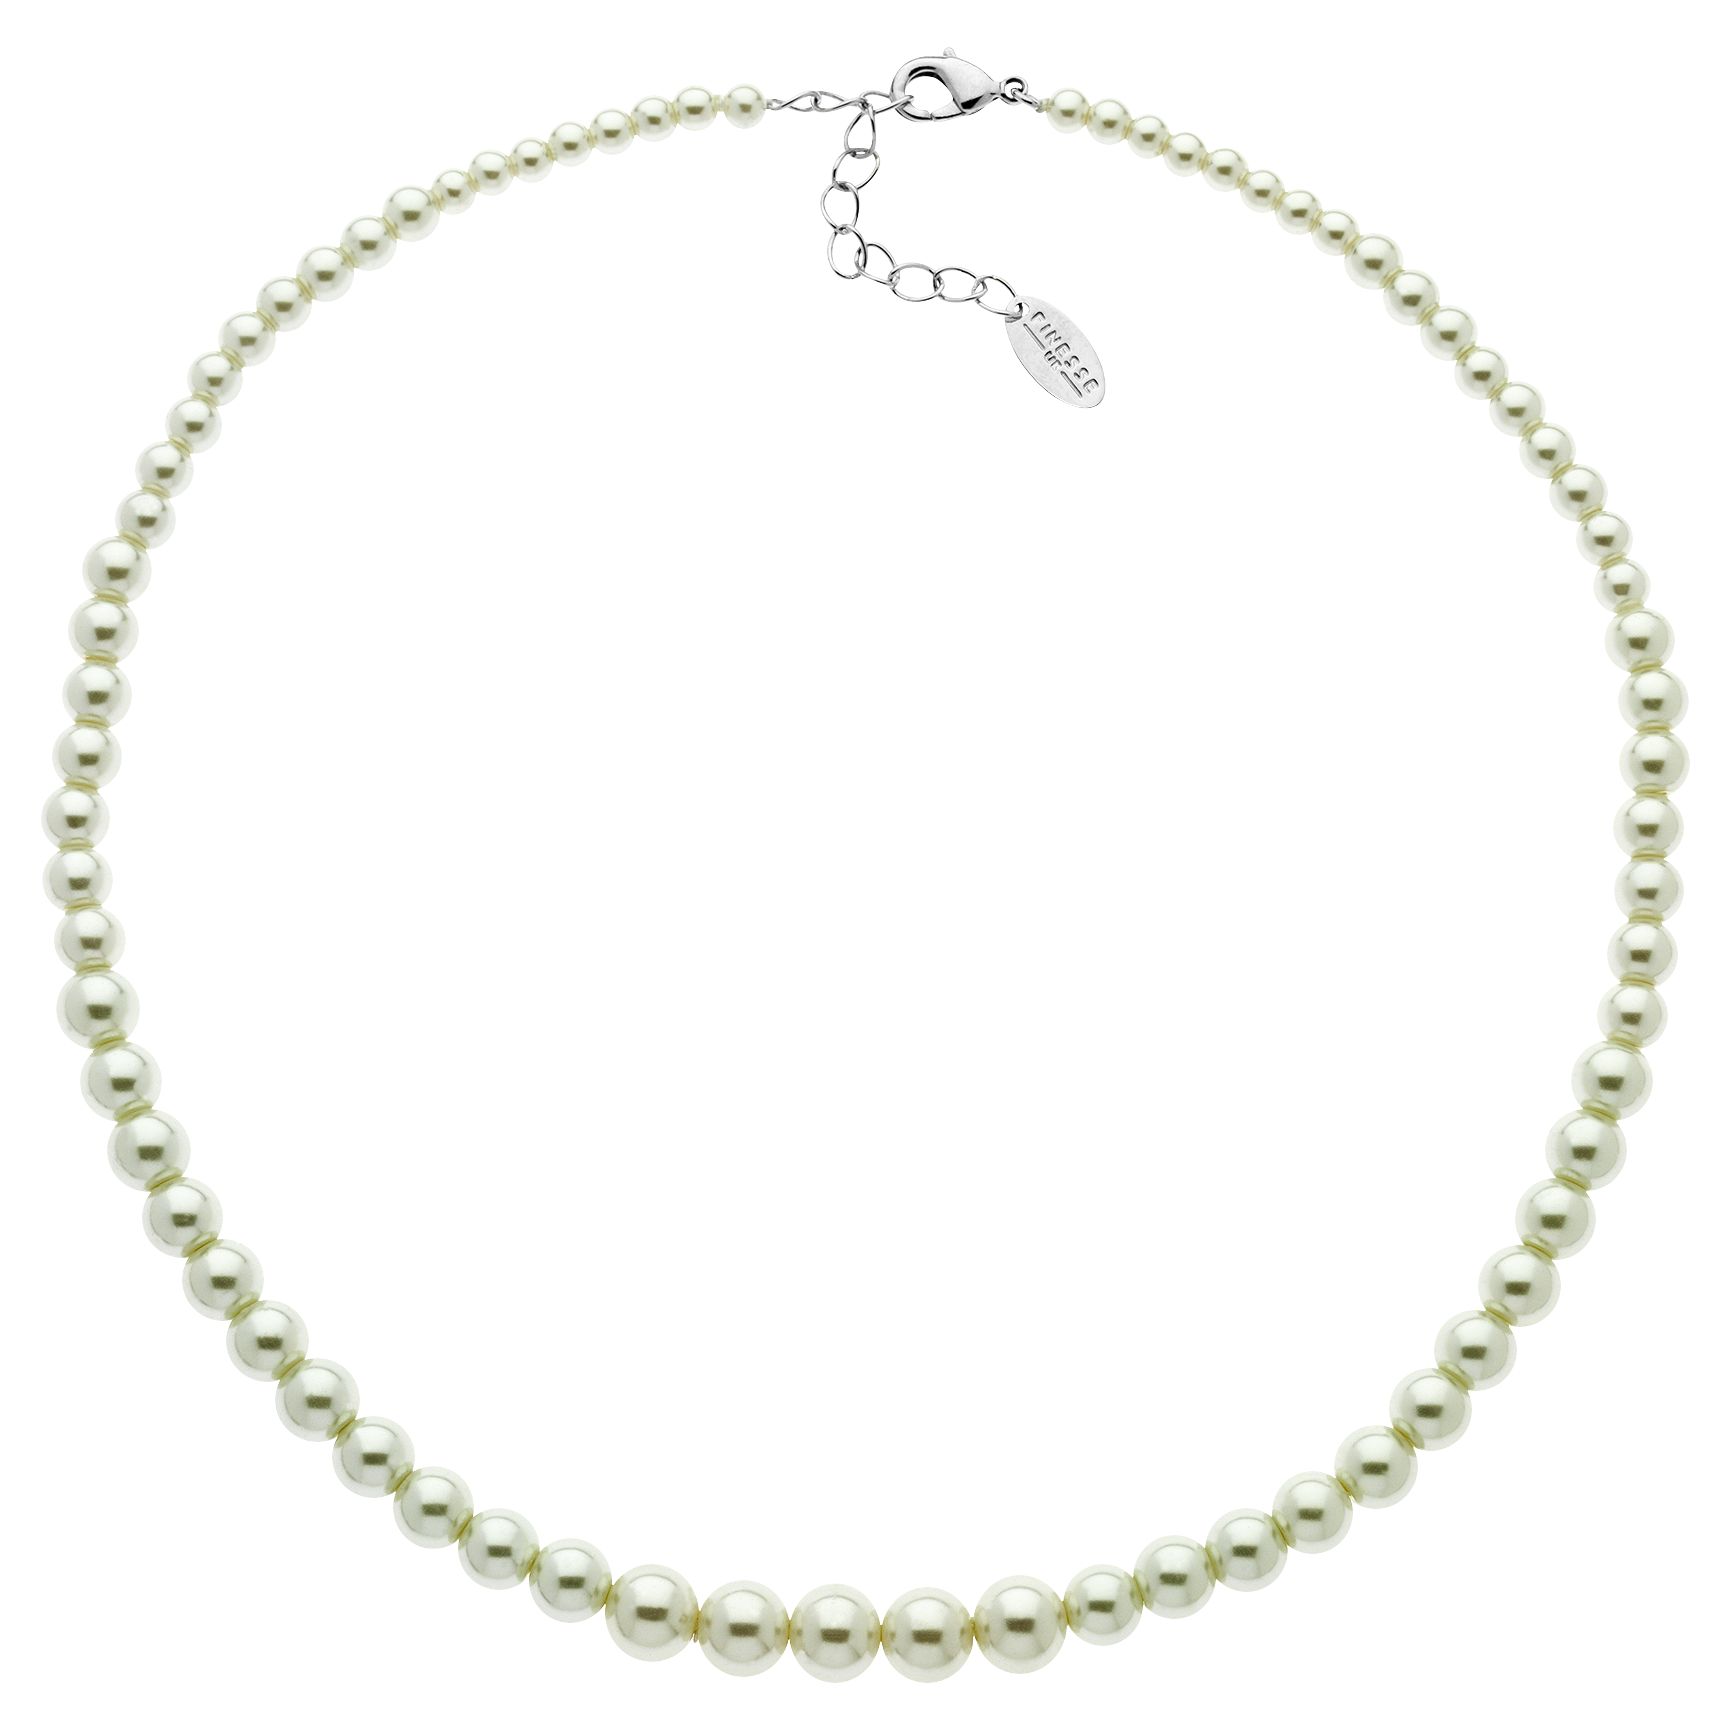 Buy Finesse Rhodium Plated Graduated Faux Pearl Necklace, White Online at johnlewis.com